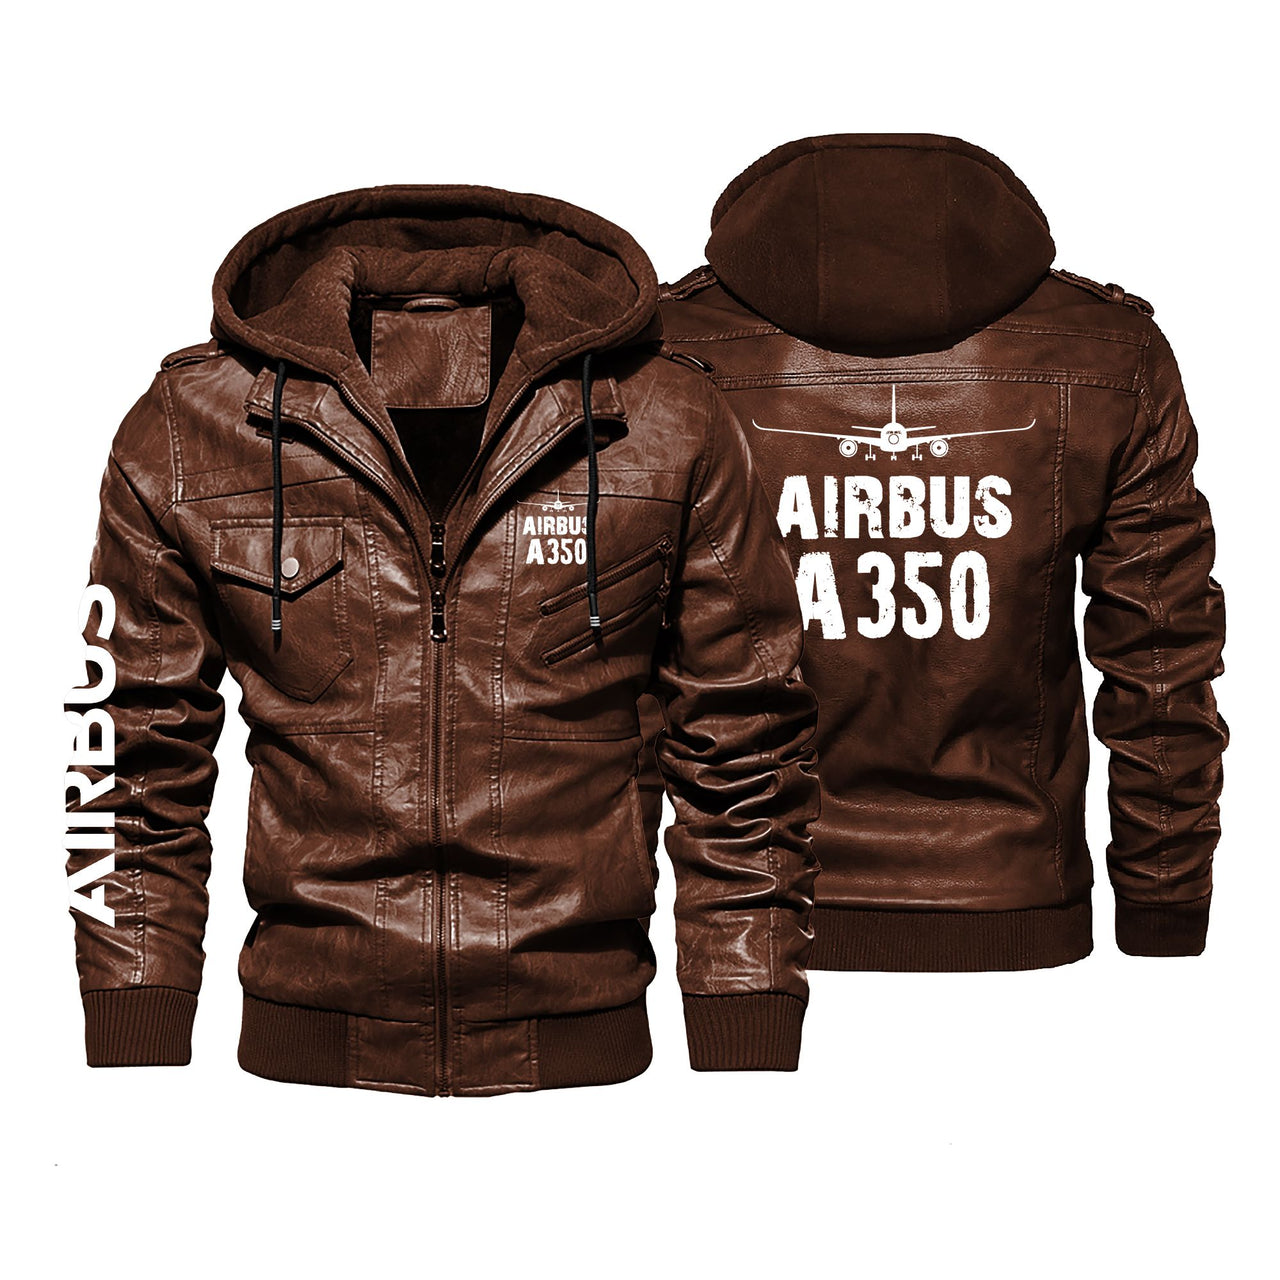 Airbus A350 & Plane Designed Hooded Leather Jackets